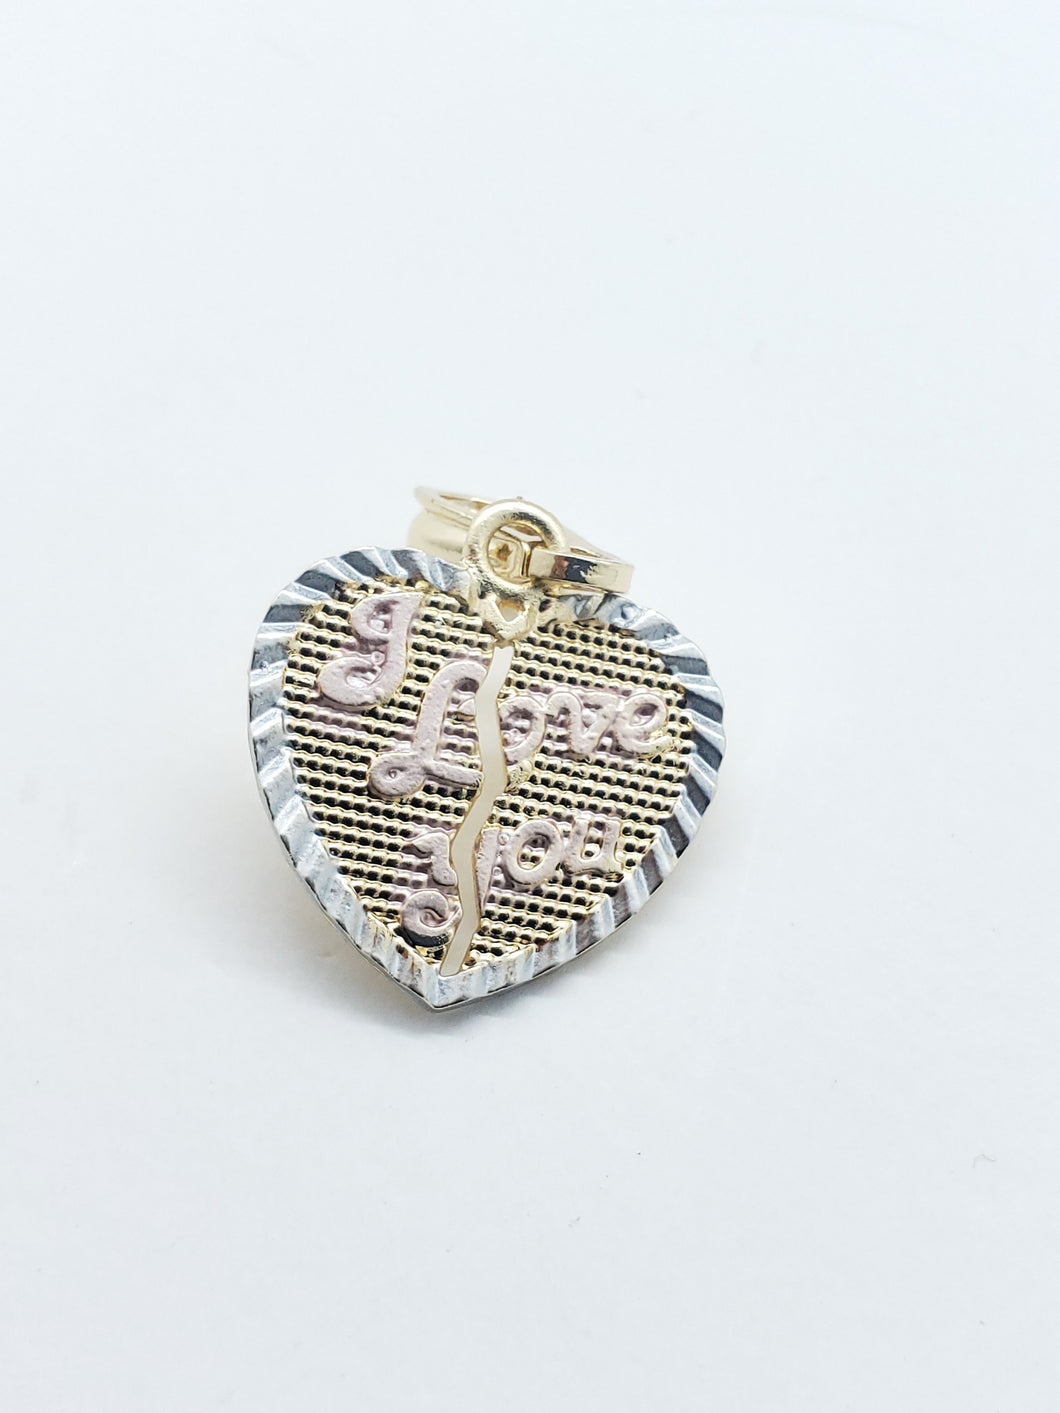 Small ripped heart with message (I love You) - Rosina Jewlery